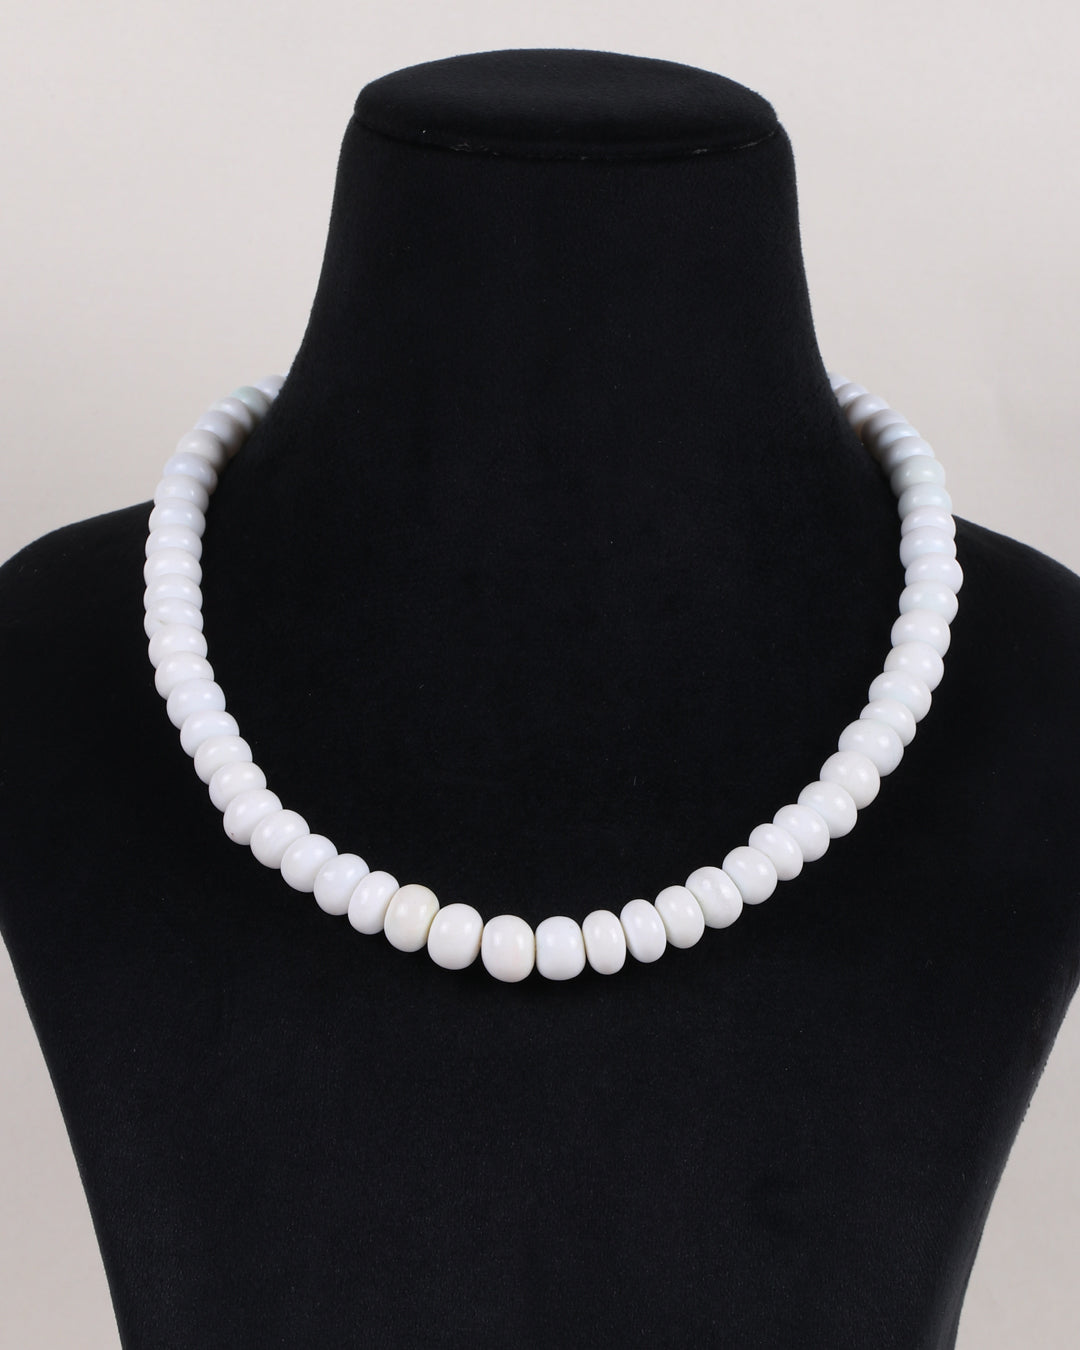 White Opal Gemstone Rondelle  Smooth Beads Necklace Jewelry